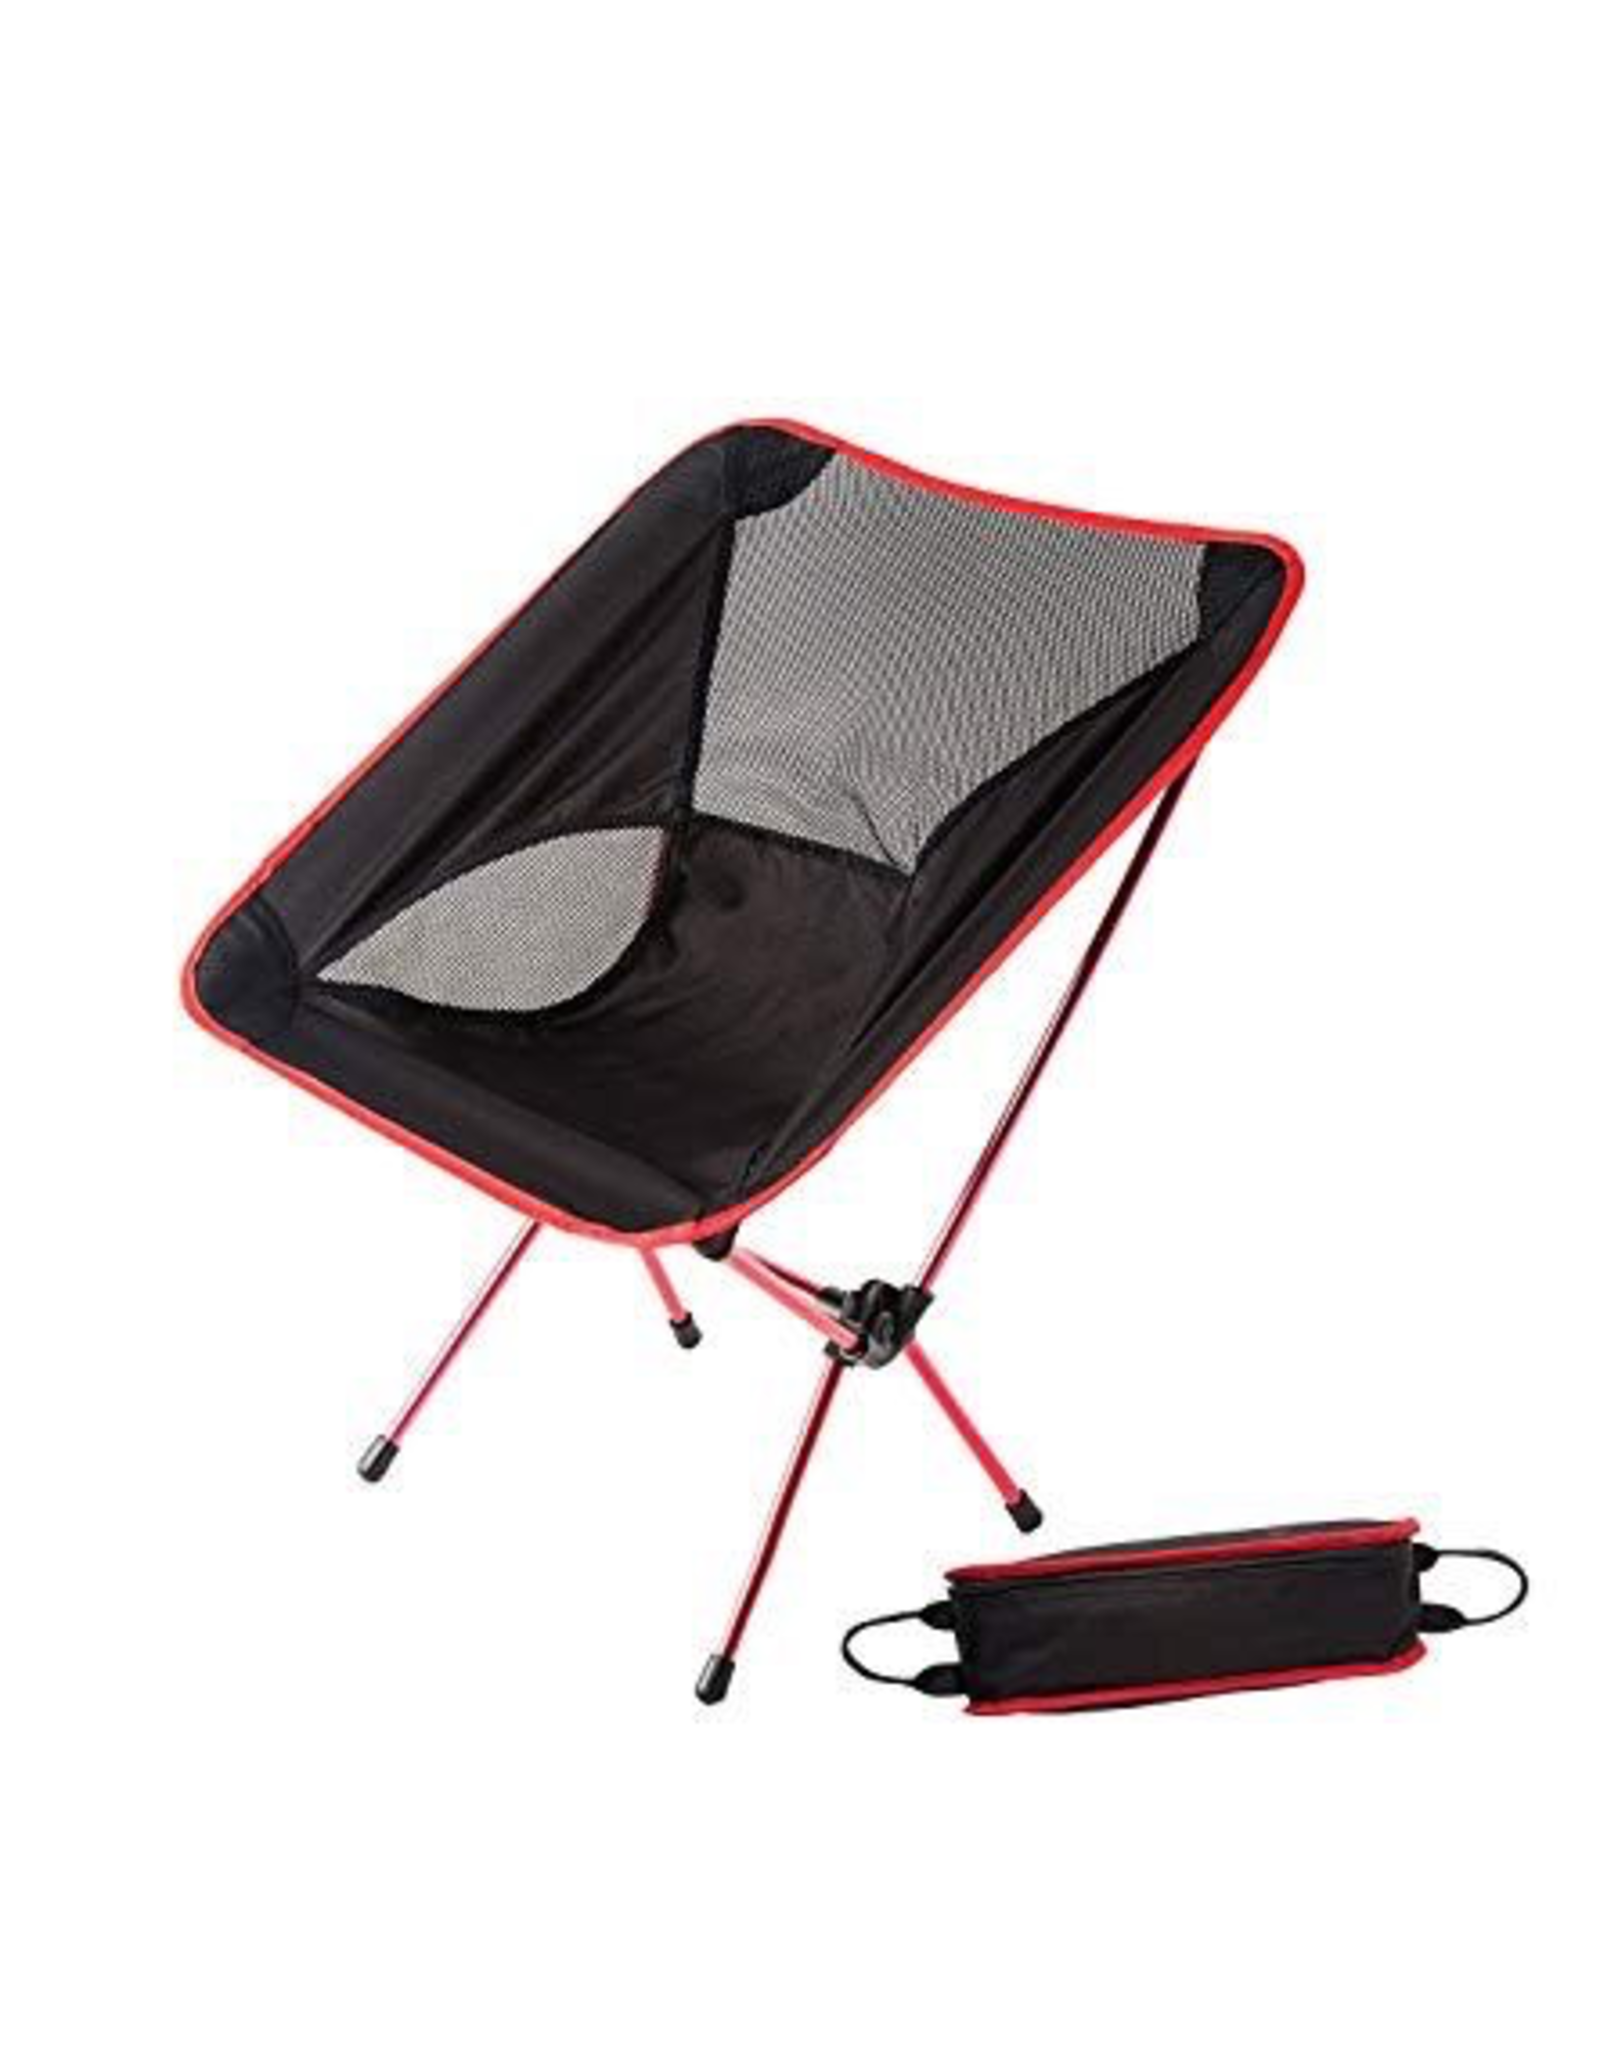 CHINOOK TECHNICAL OUTDOOR ALLPURPOSE CHAIR